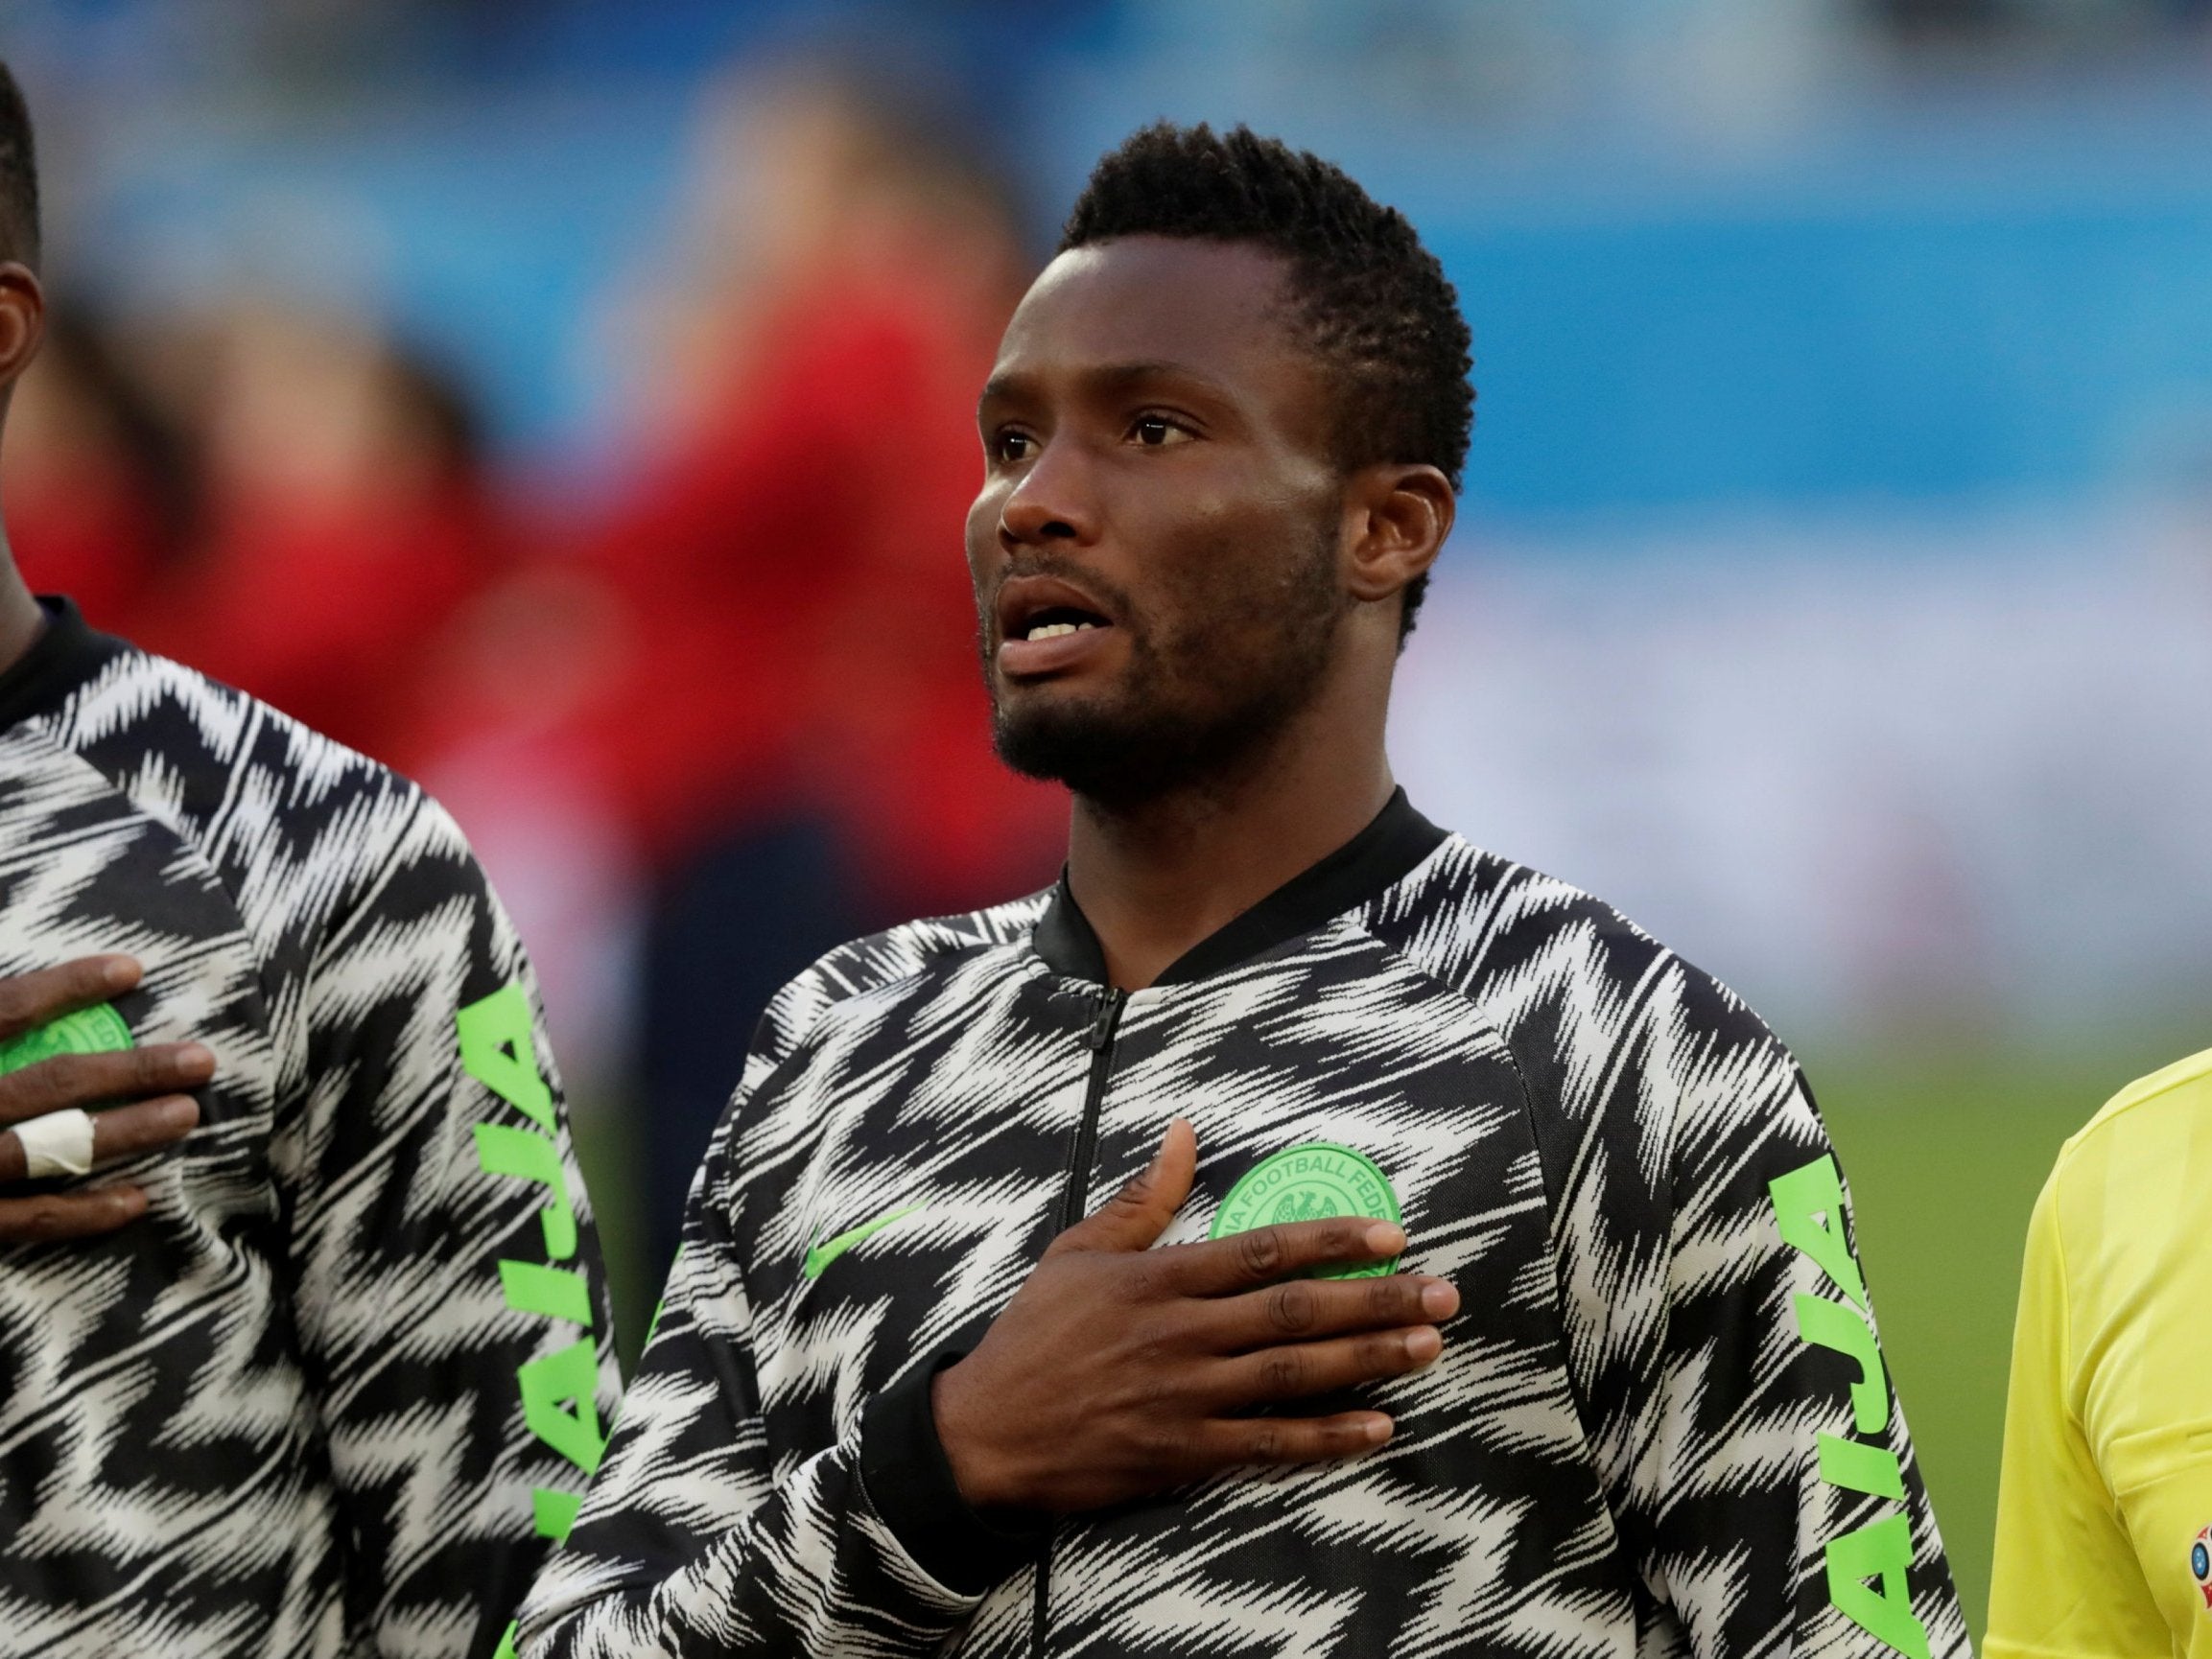 Mikel was told just hours before the match in St Petersburg